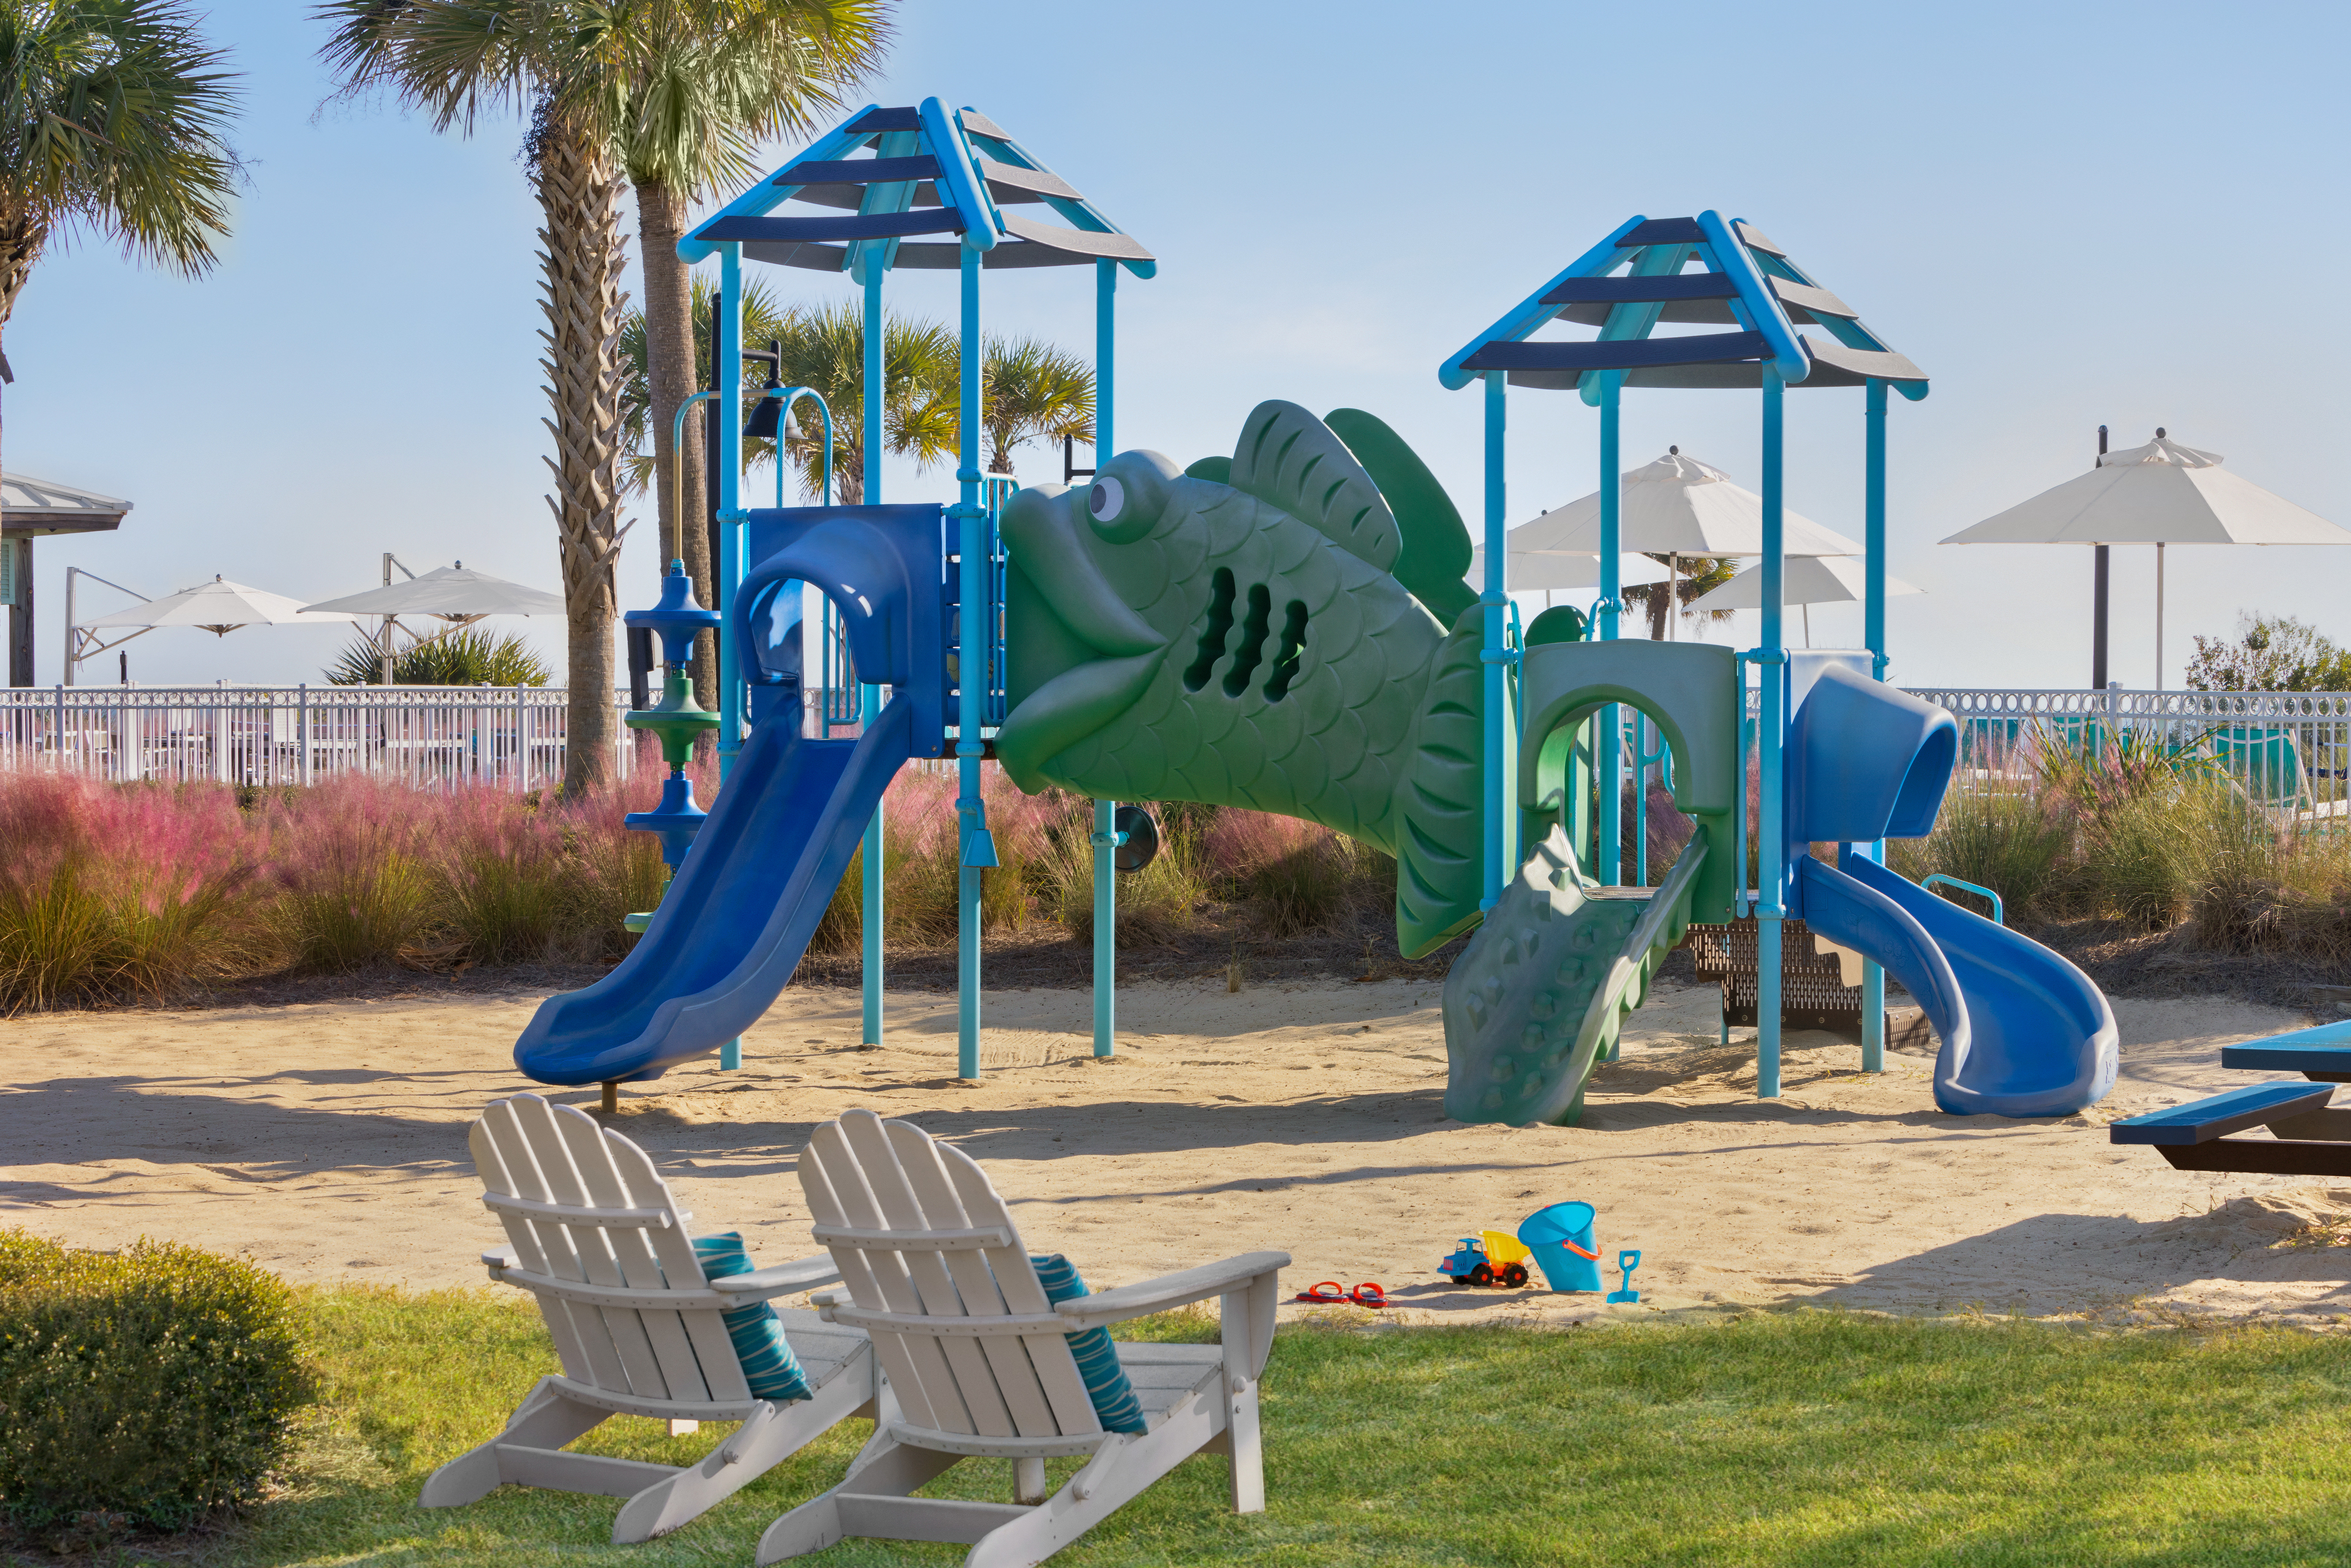 Kids will love our ocean themed playground